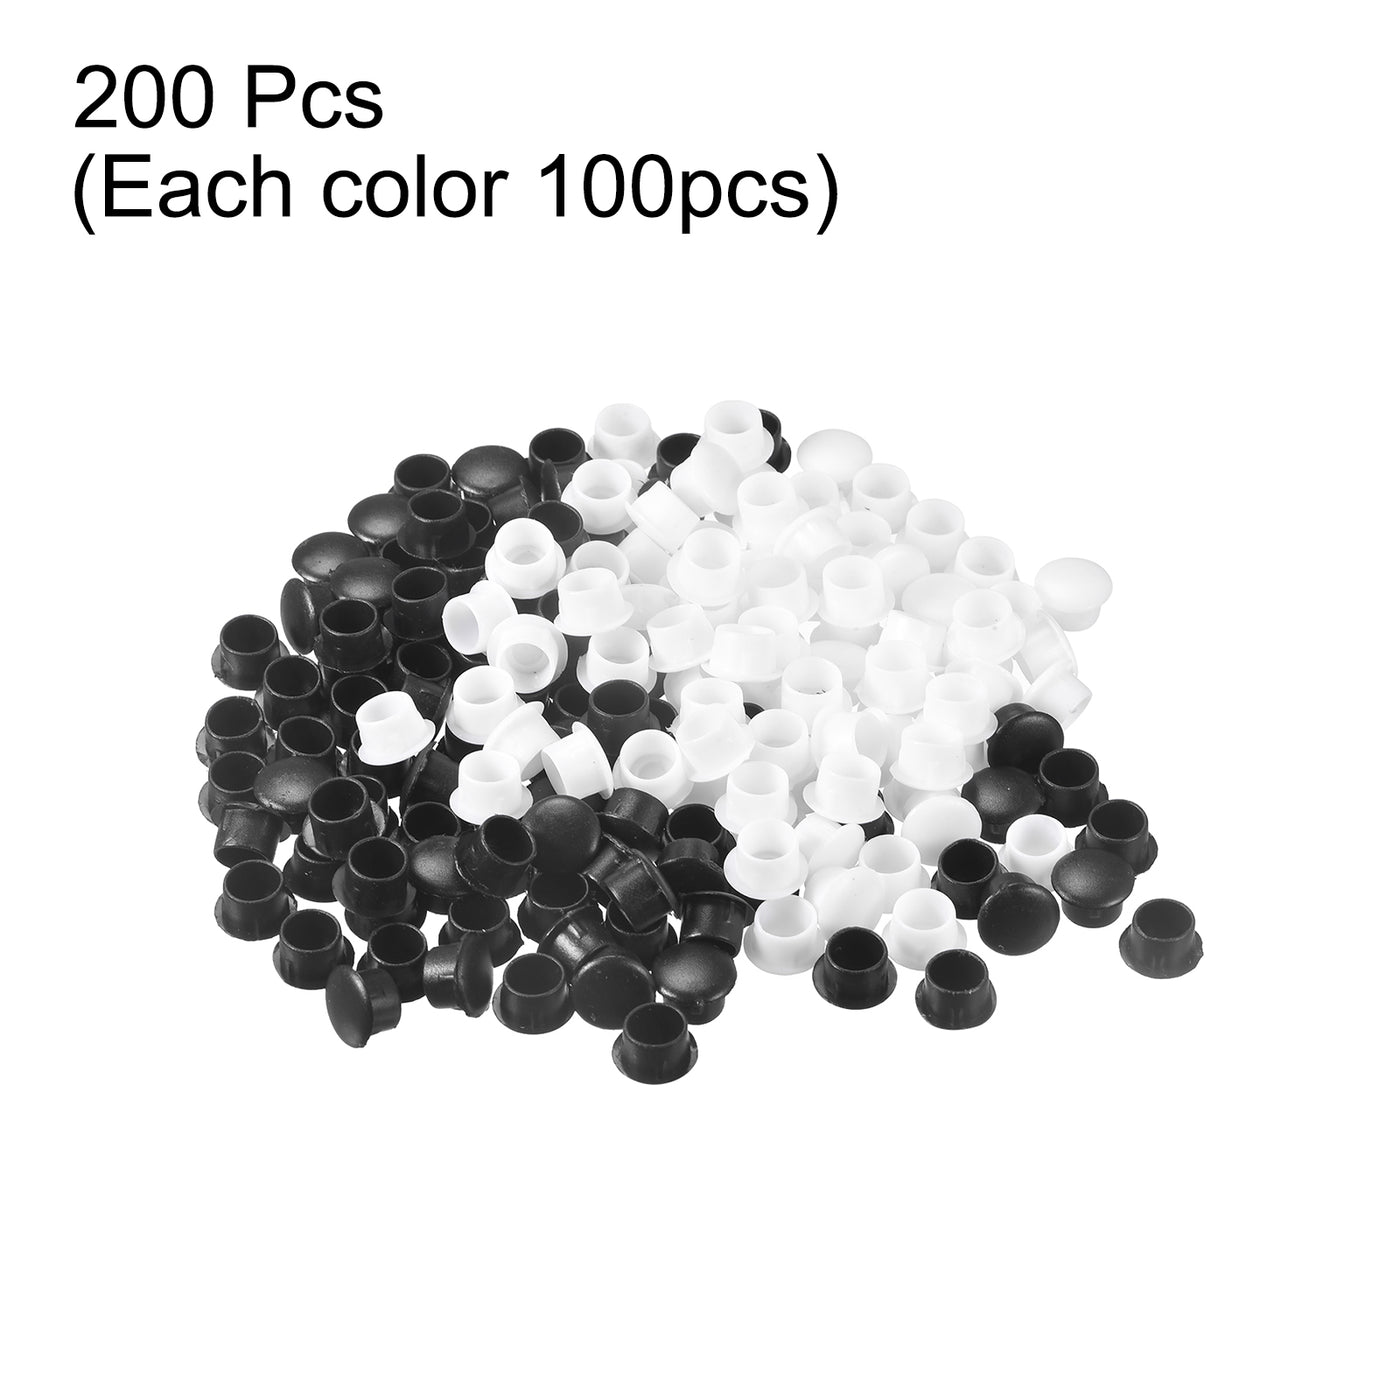 uxcell Uxcell Screw Hole Plugs, 10mm(25/64") Dia PP Snap in Shelf Button Flush Type Caps for Furniture Cabinet Cupboard, Black/Milky White 200 Pcs